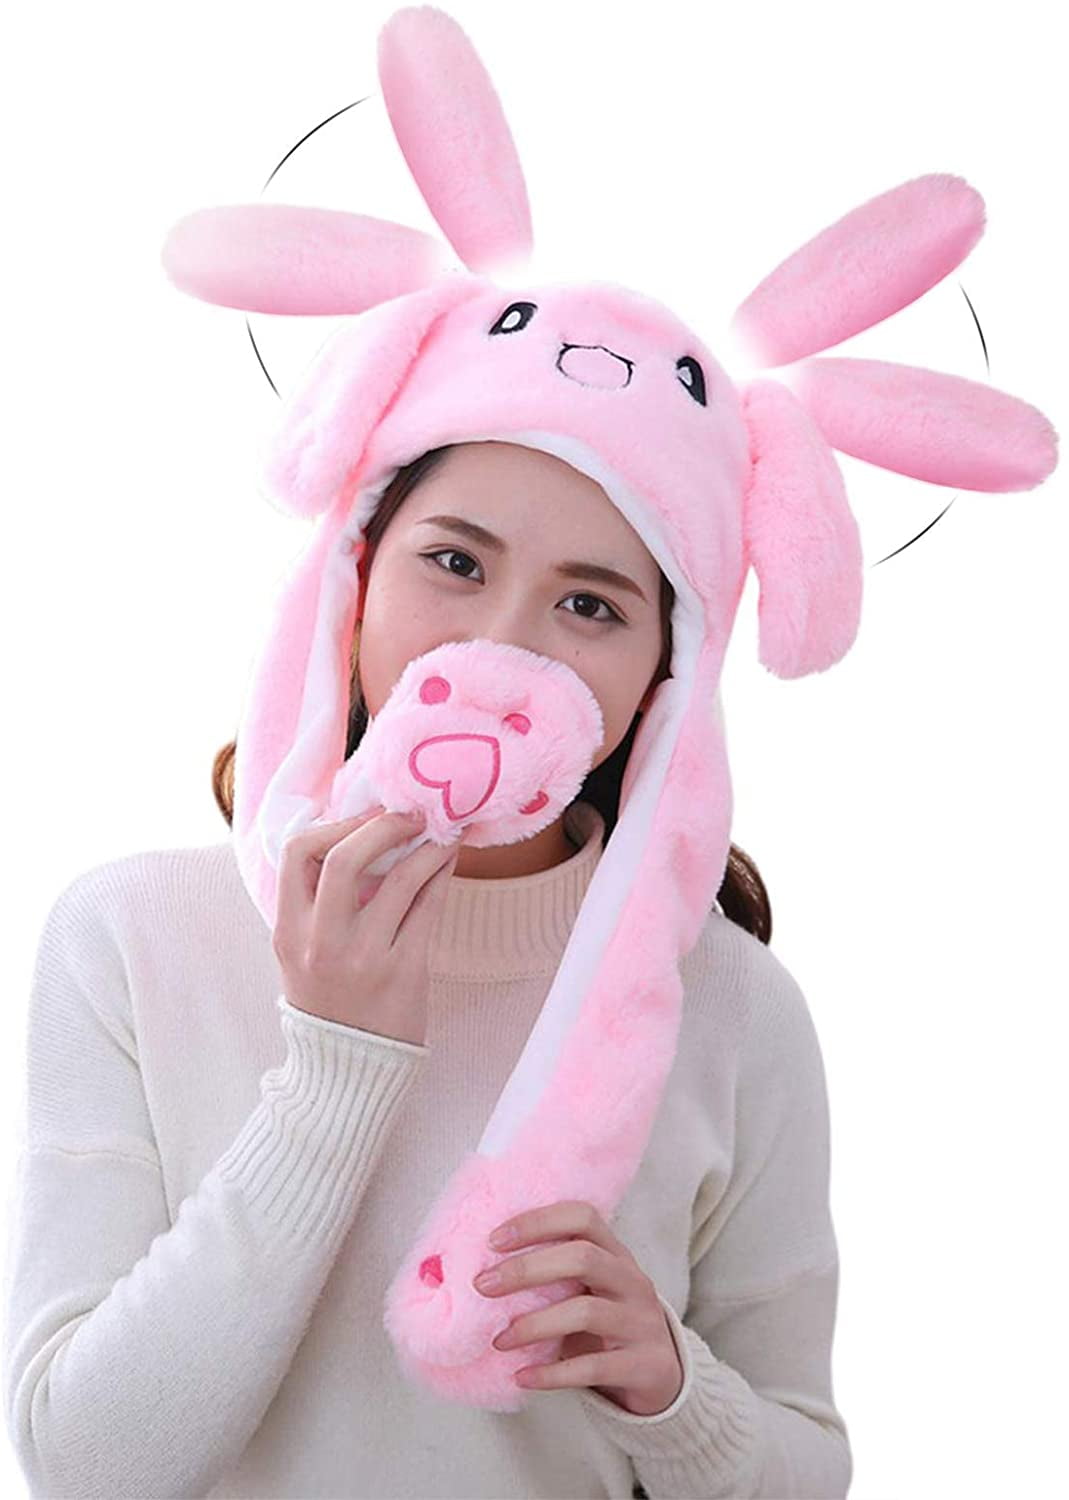 Bunny Hat Funny Plush Bunny Hats Ear Moving Jumping Hat Rabbit Hat Kids Adult Christmas Party Cosplay Cute Animal Hats